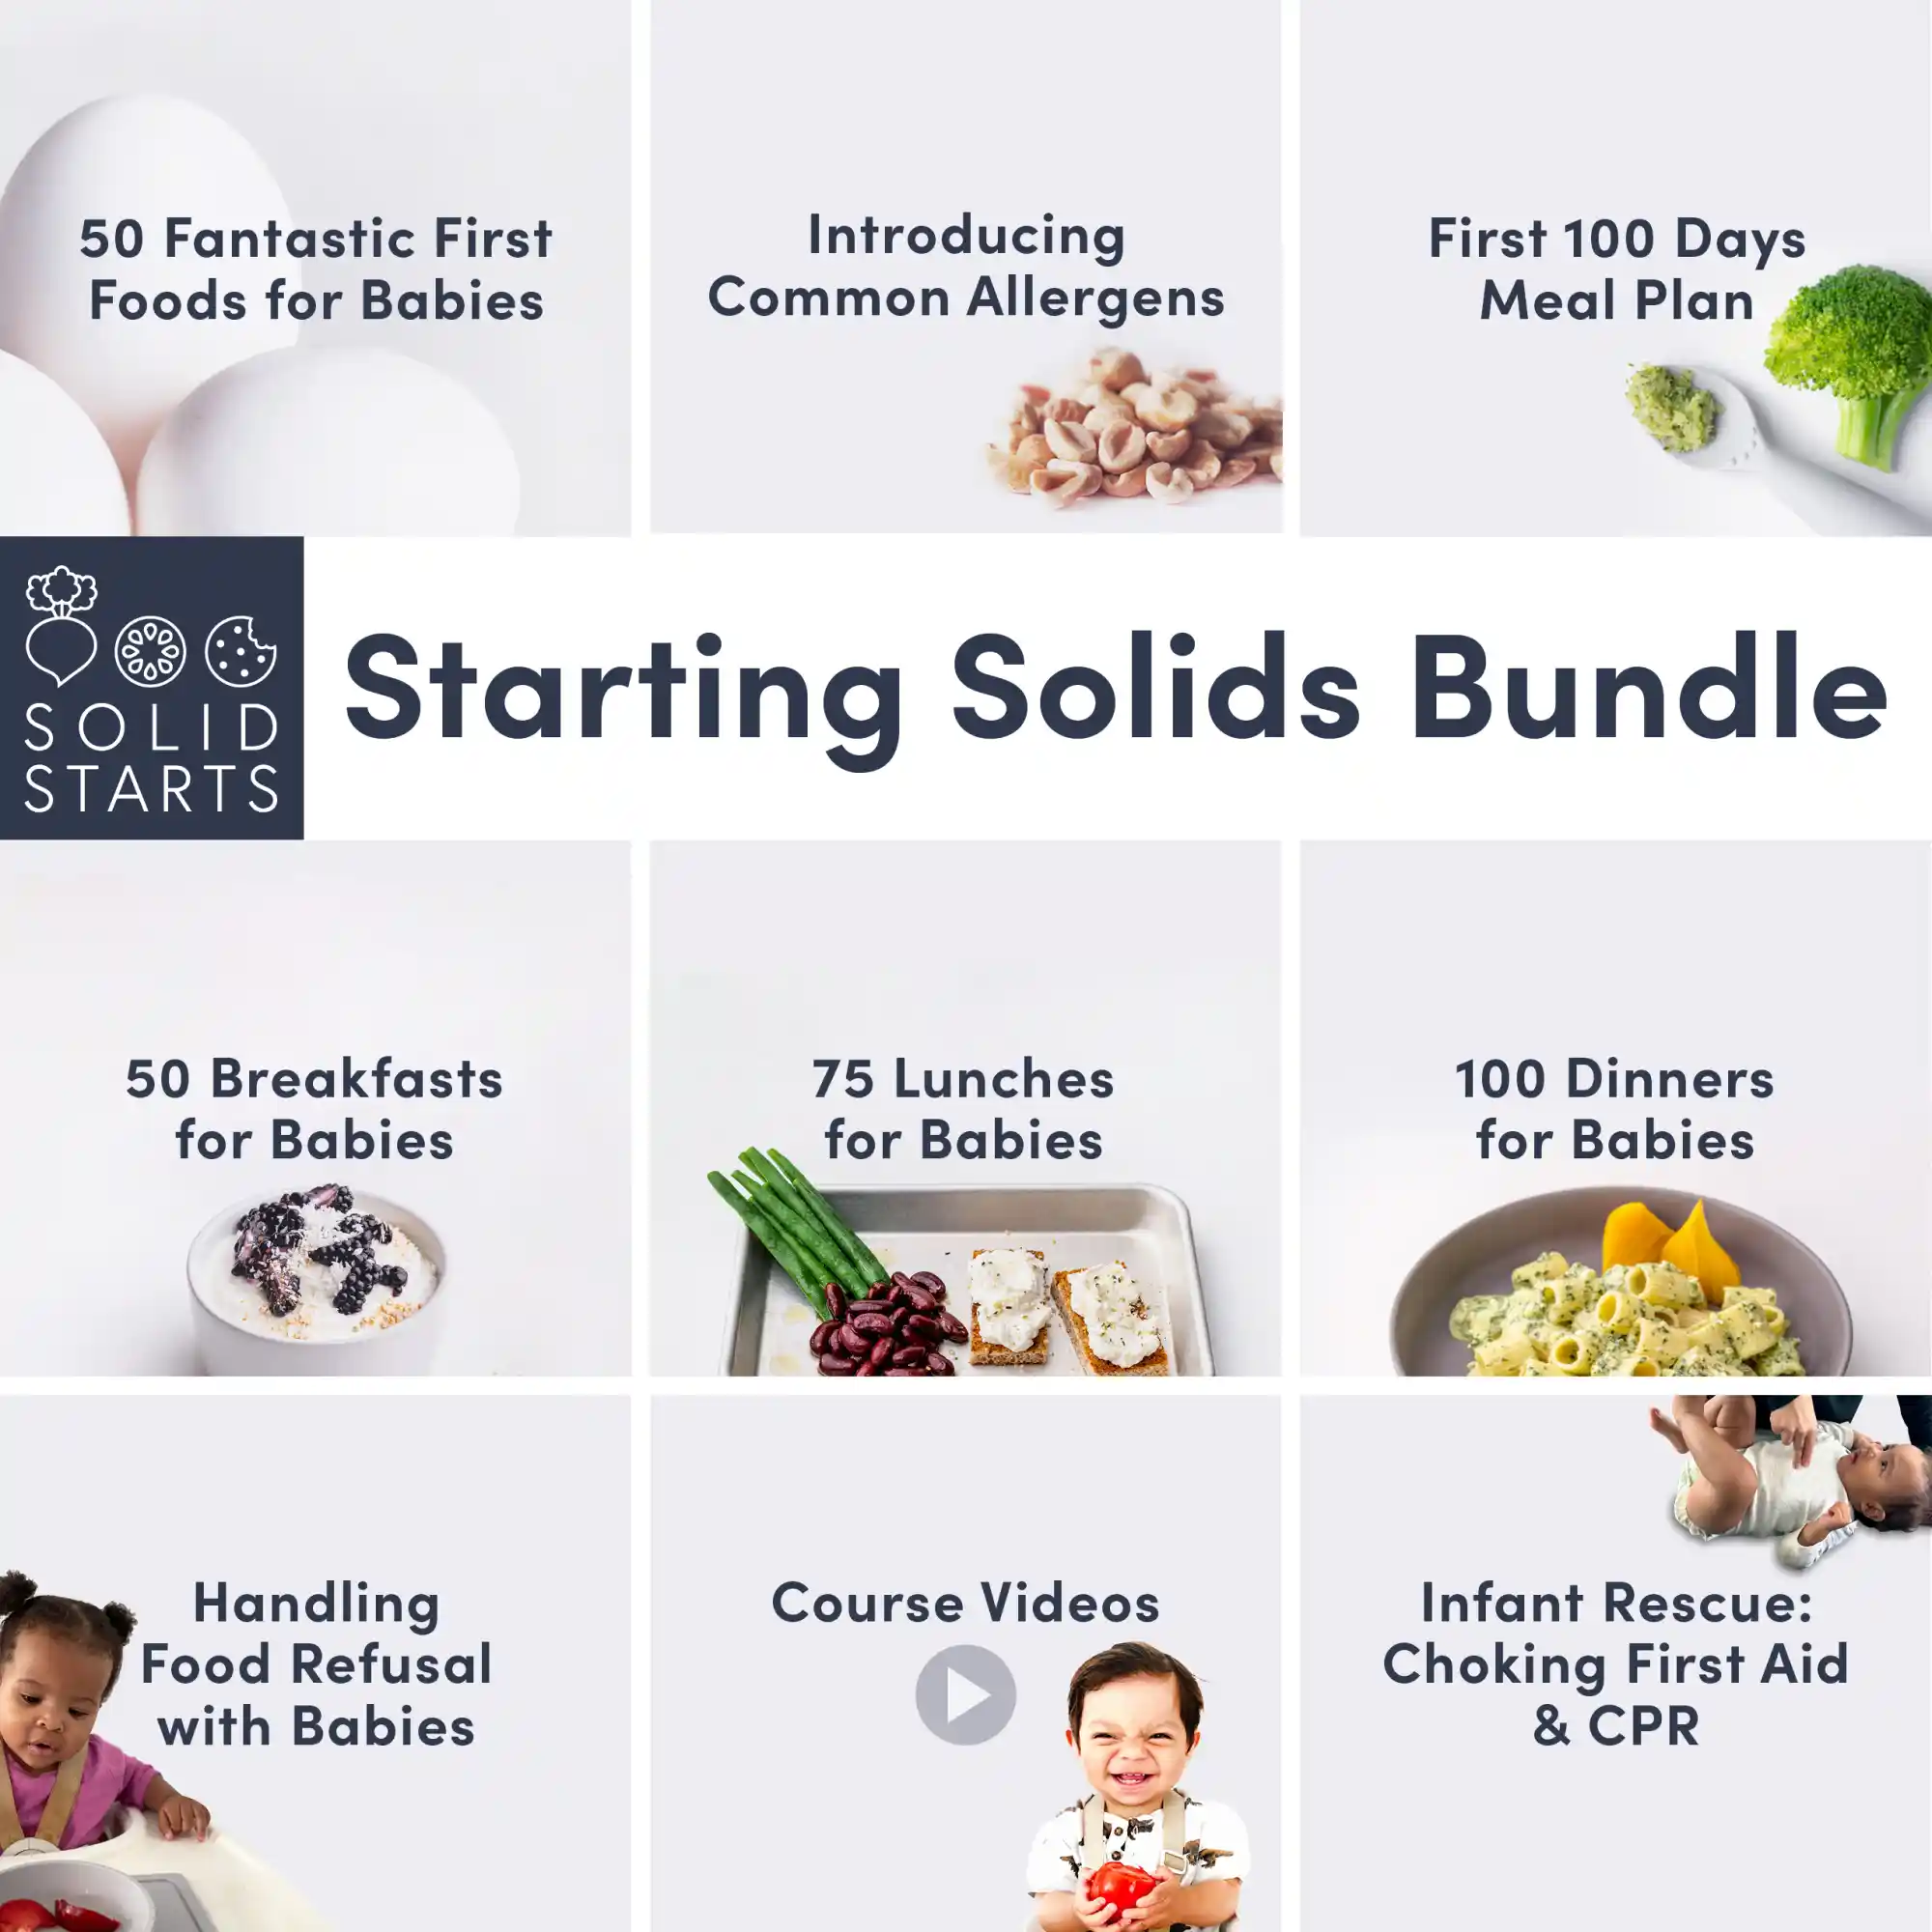 Can Babies Eat Potatoes? - Solid Starts